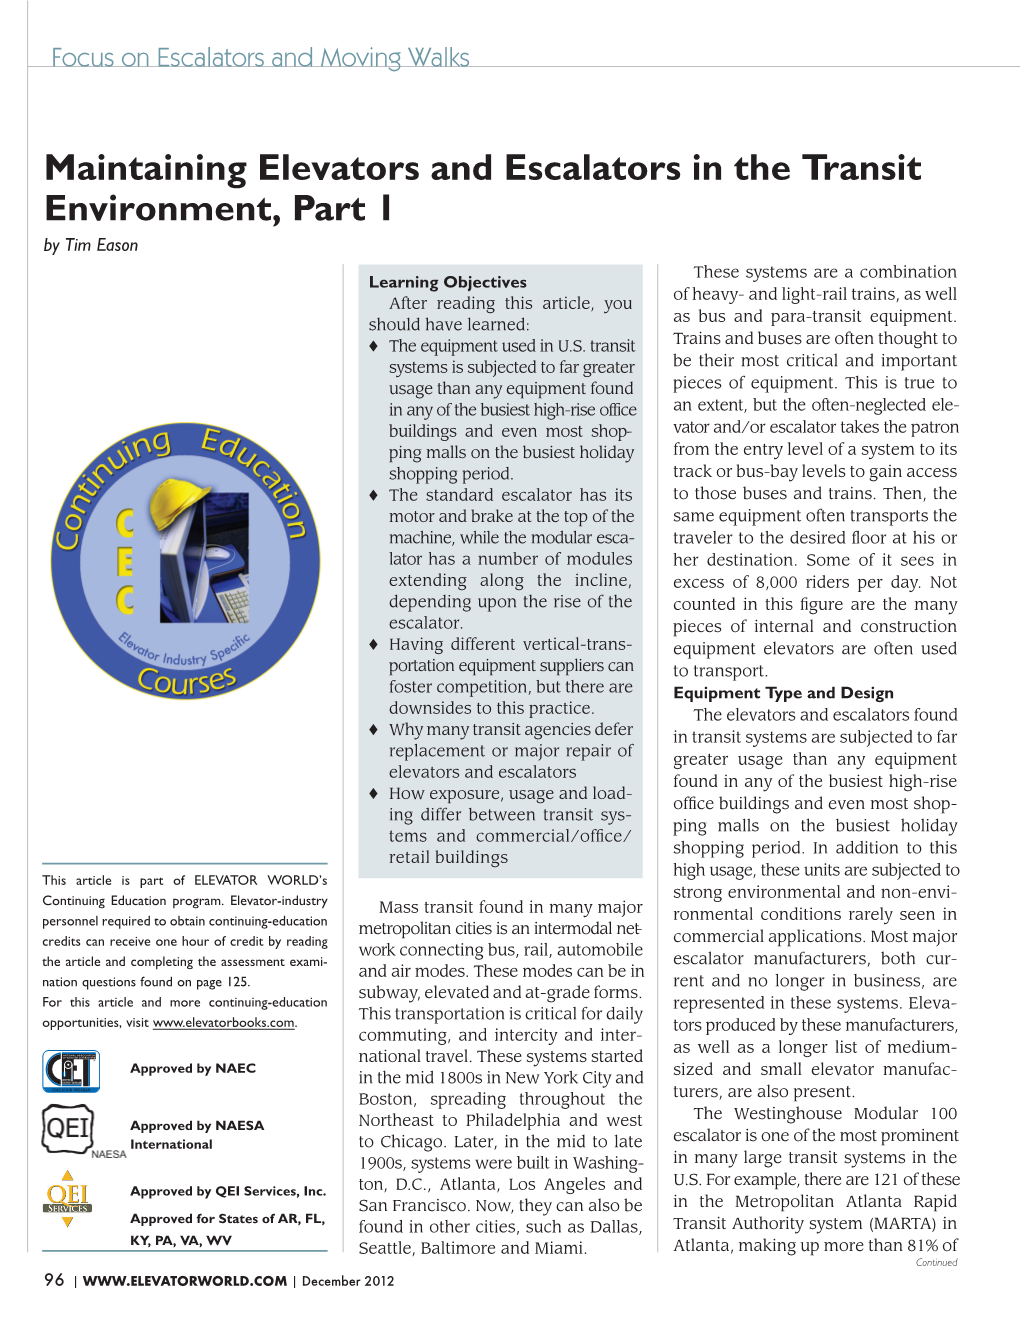 Maintaining Elevators and Escalators in the Transit Environment, Part 1